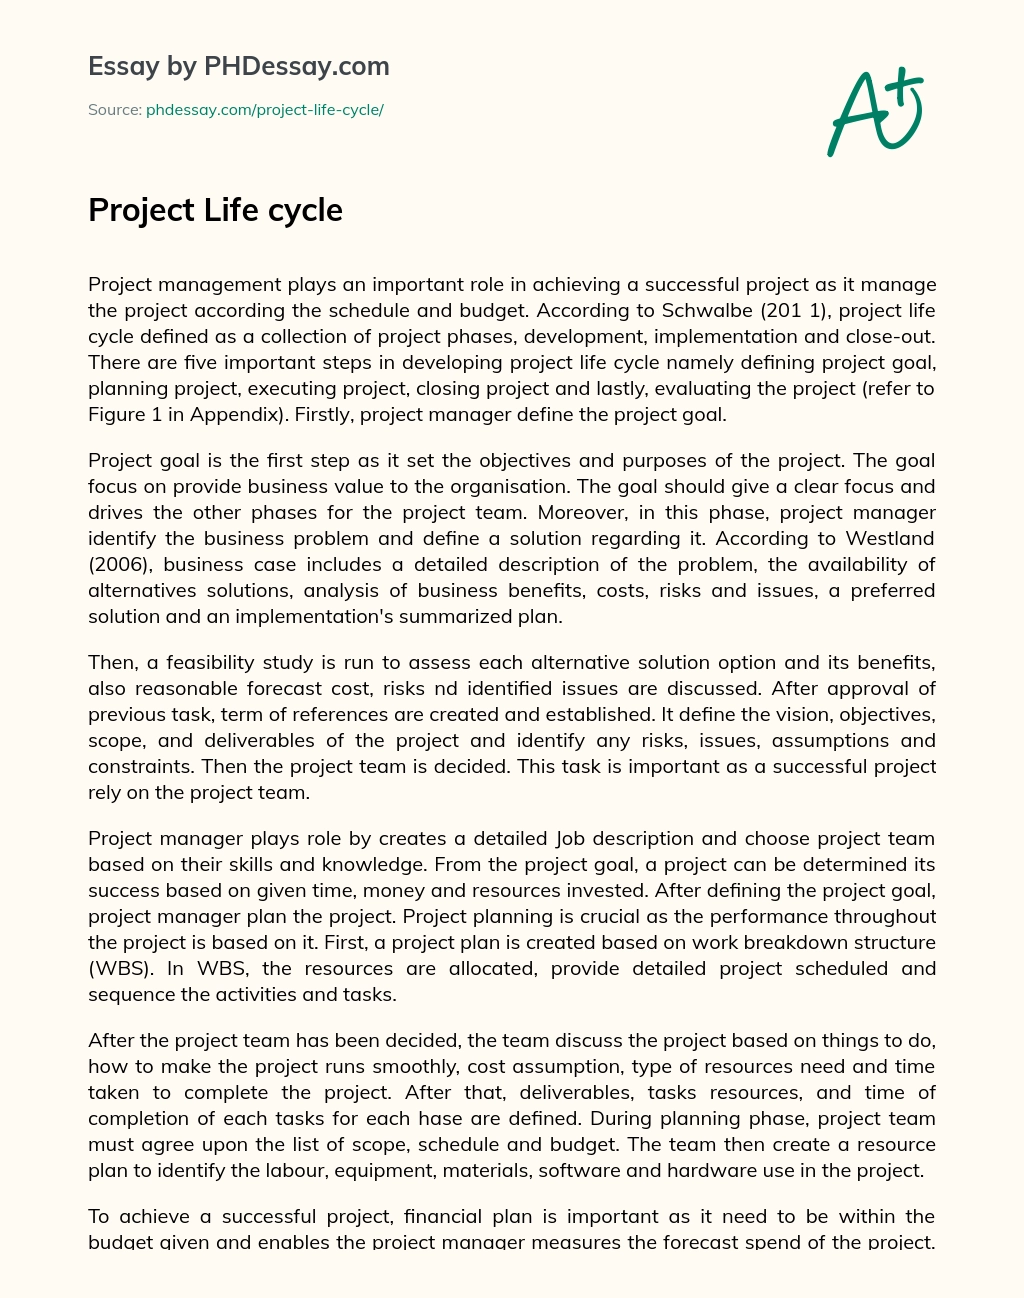 Project Life cycle essay